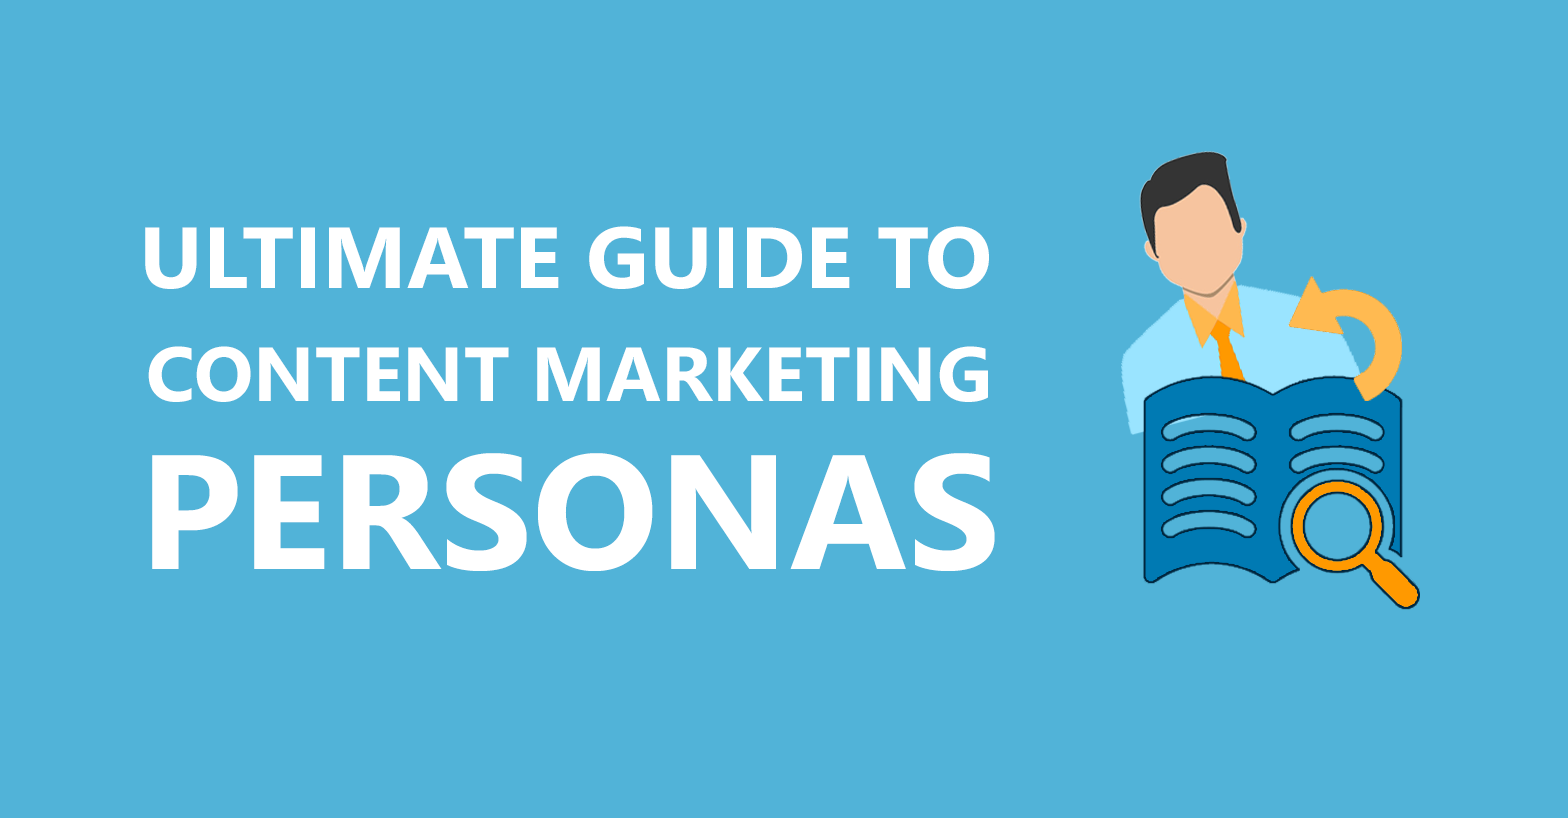 Content Marketing Personas: Your Ultimate Guide